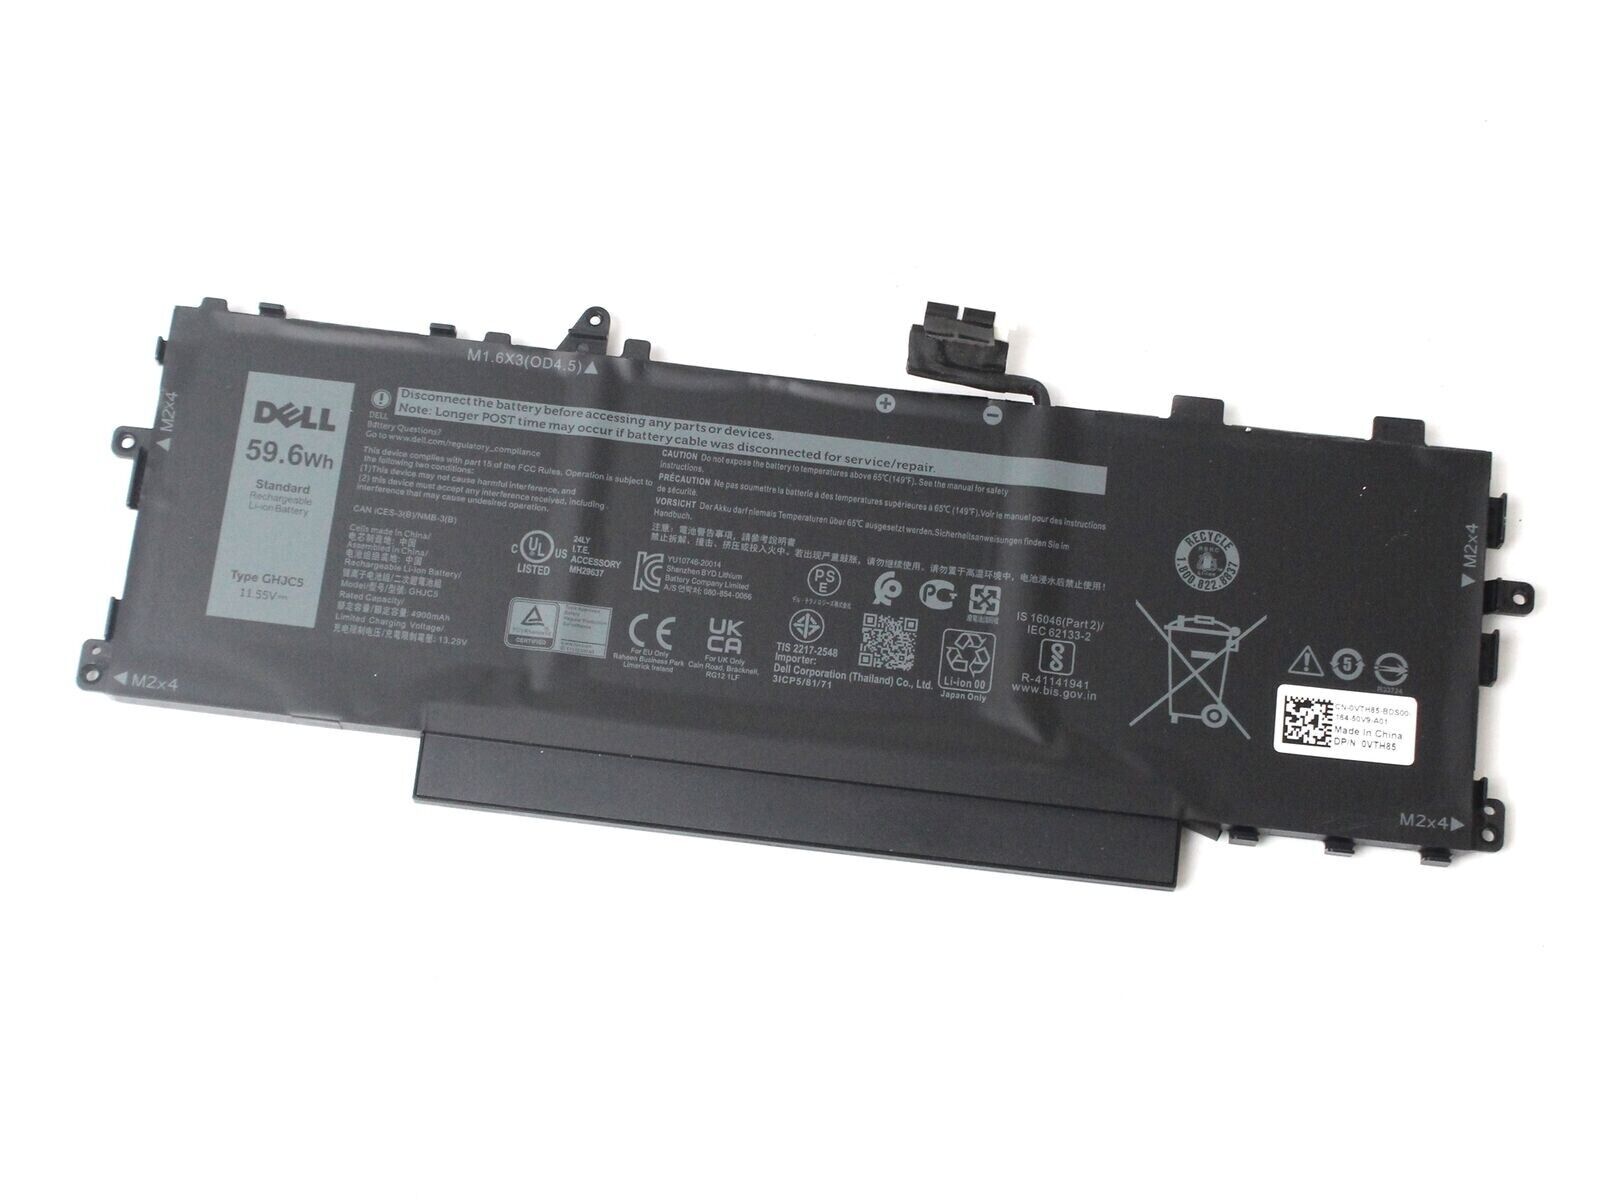 NEW Genuine Dell 59.6Wh 0VTH85 Rechargeable Li-Ion Battery Type GHJC5